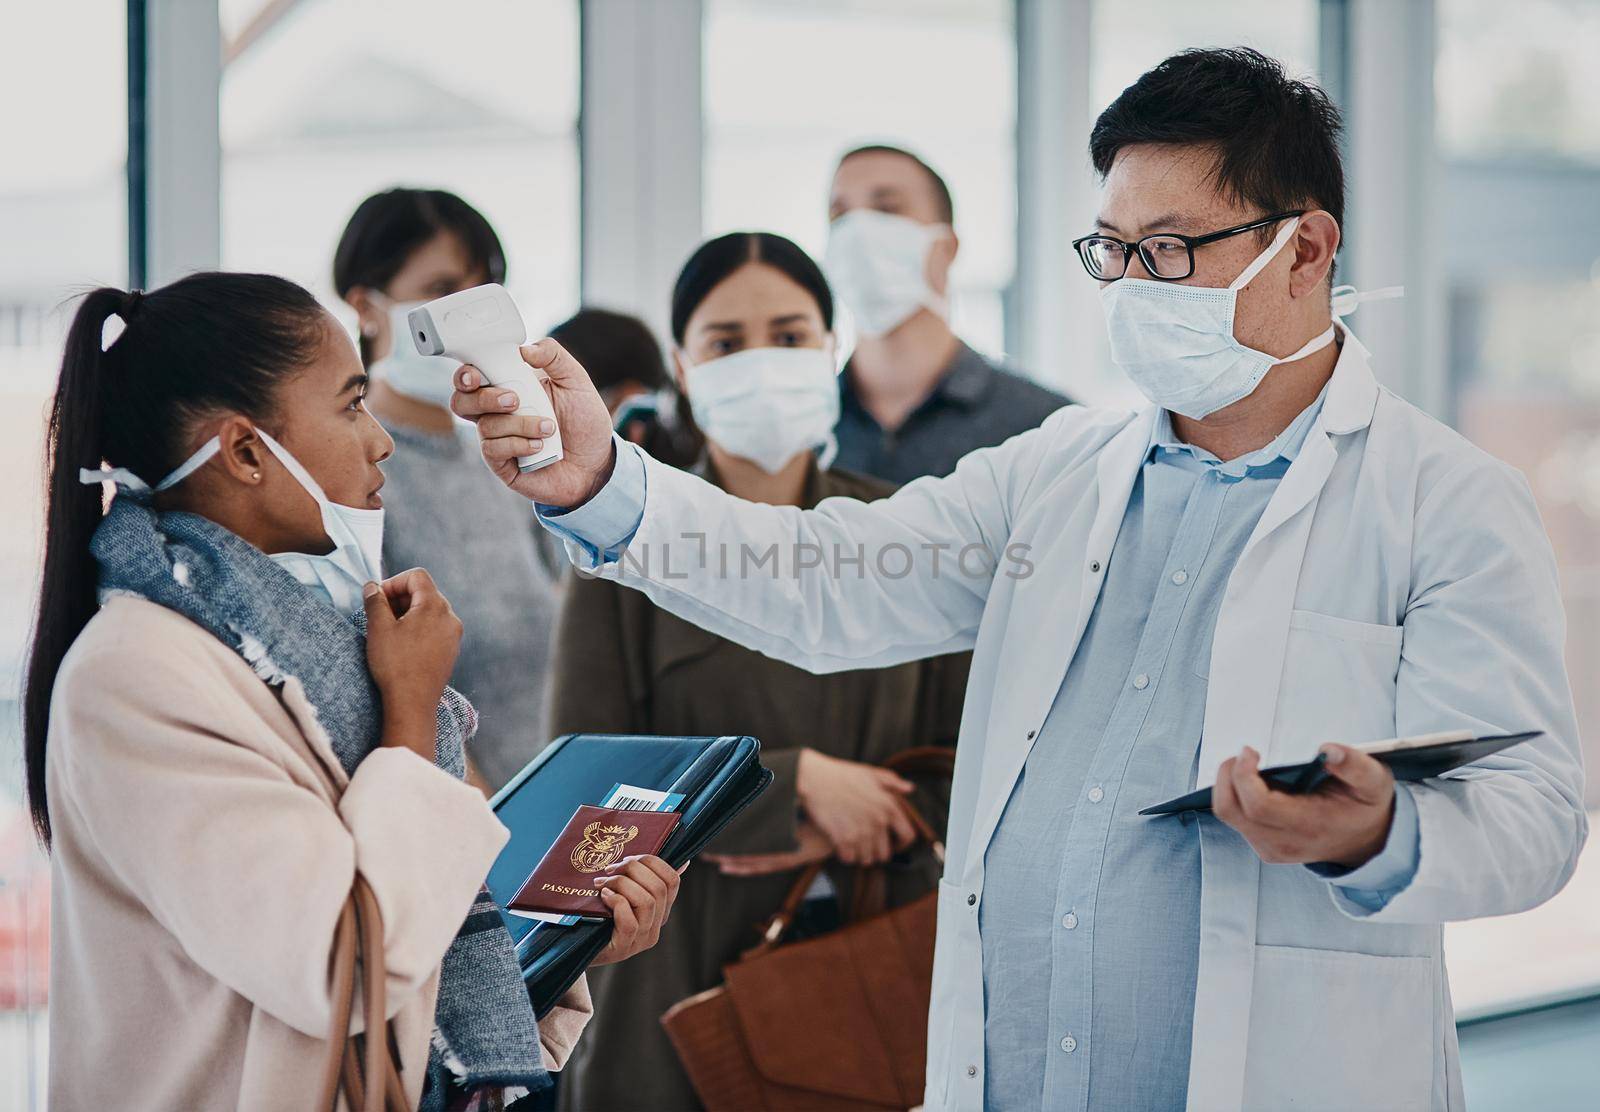 A travel healthcare worker testing covid temperature at the airport using an infrared thermometer. Medical professional doing a coronavirus check on a woman at an entrance to prevent the spread.